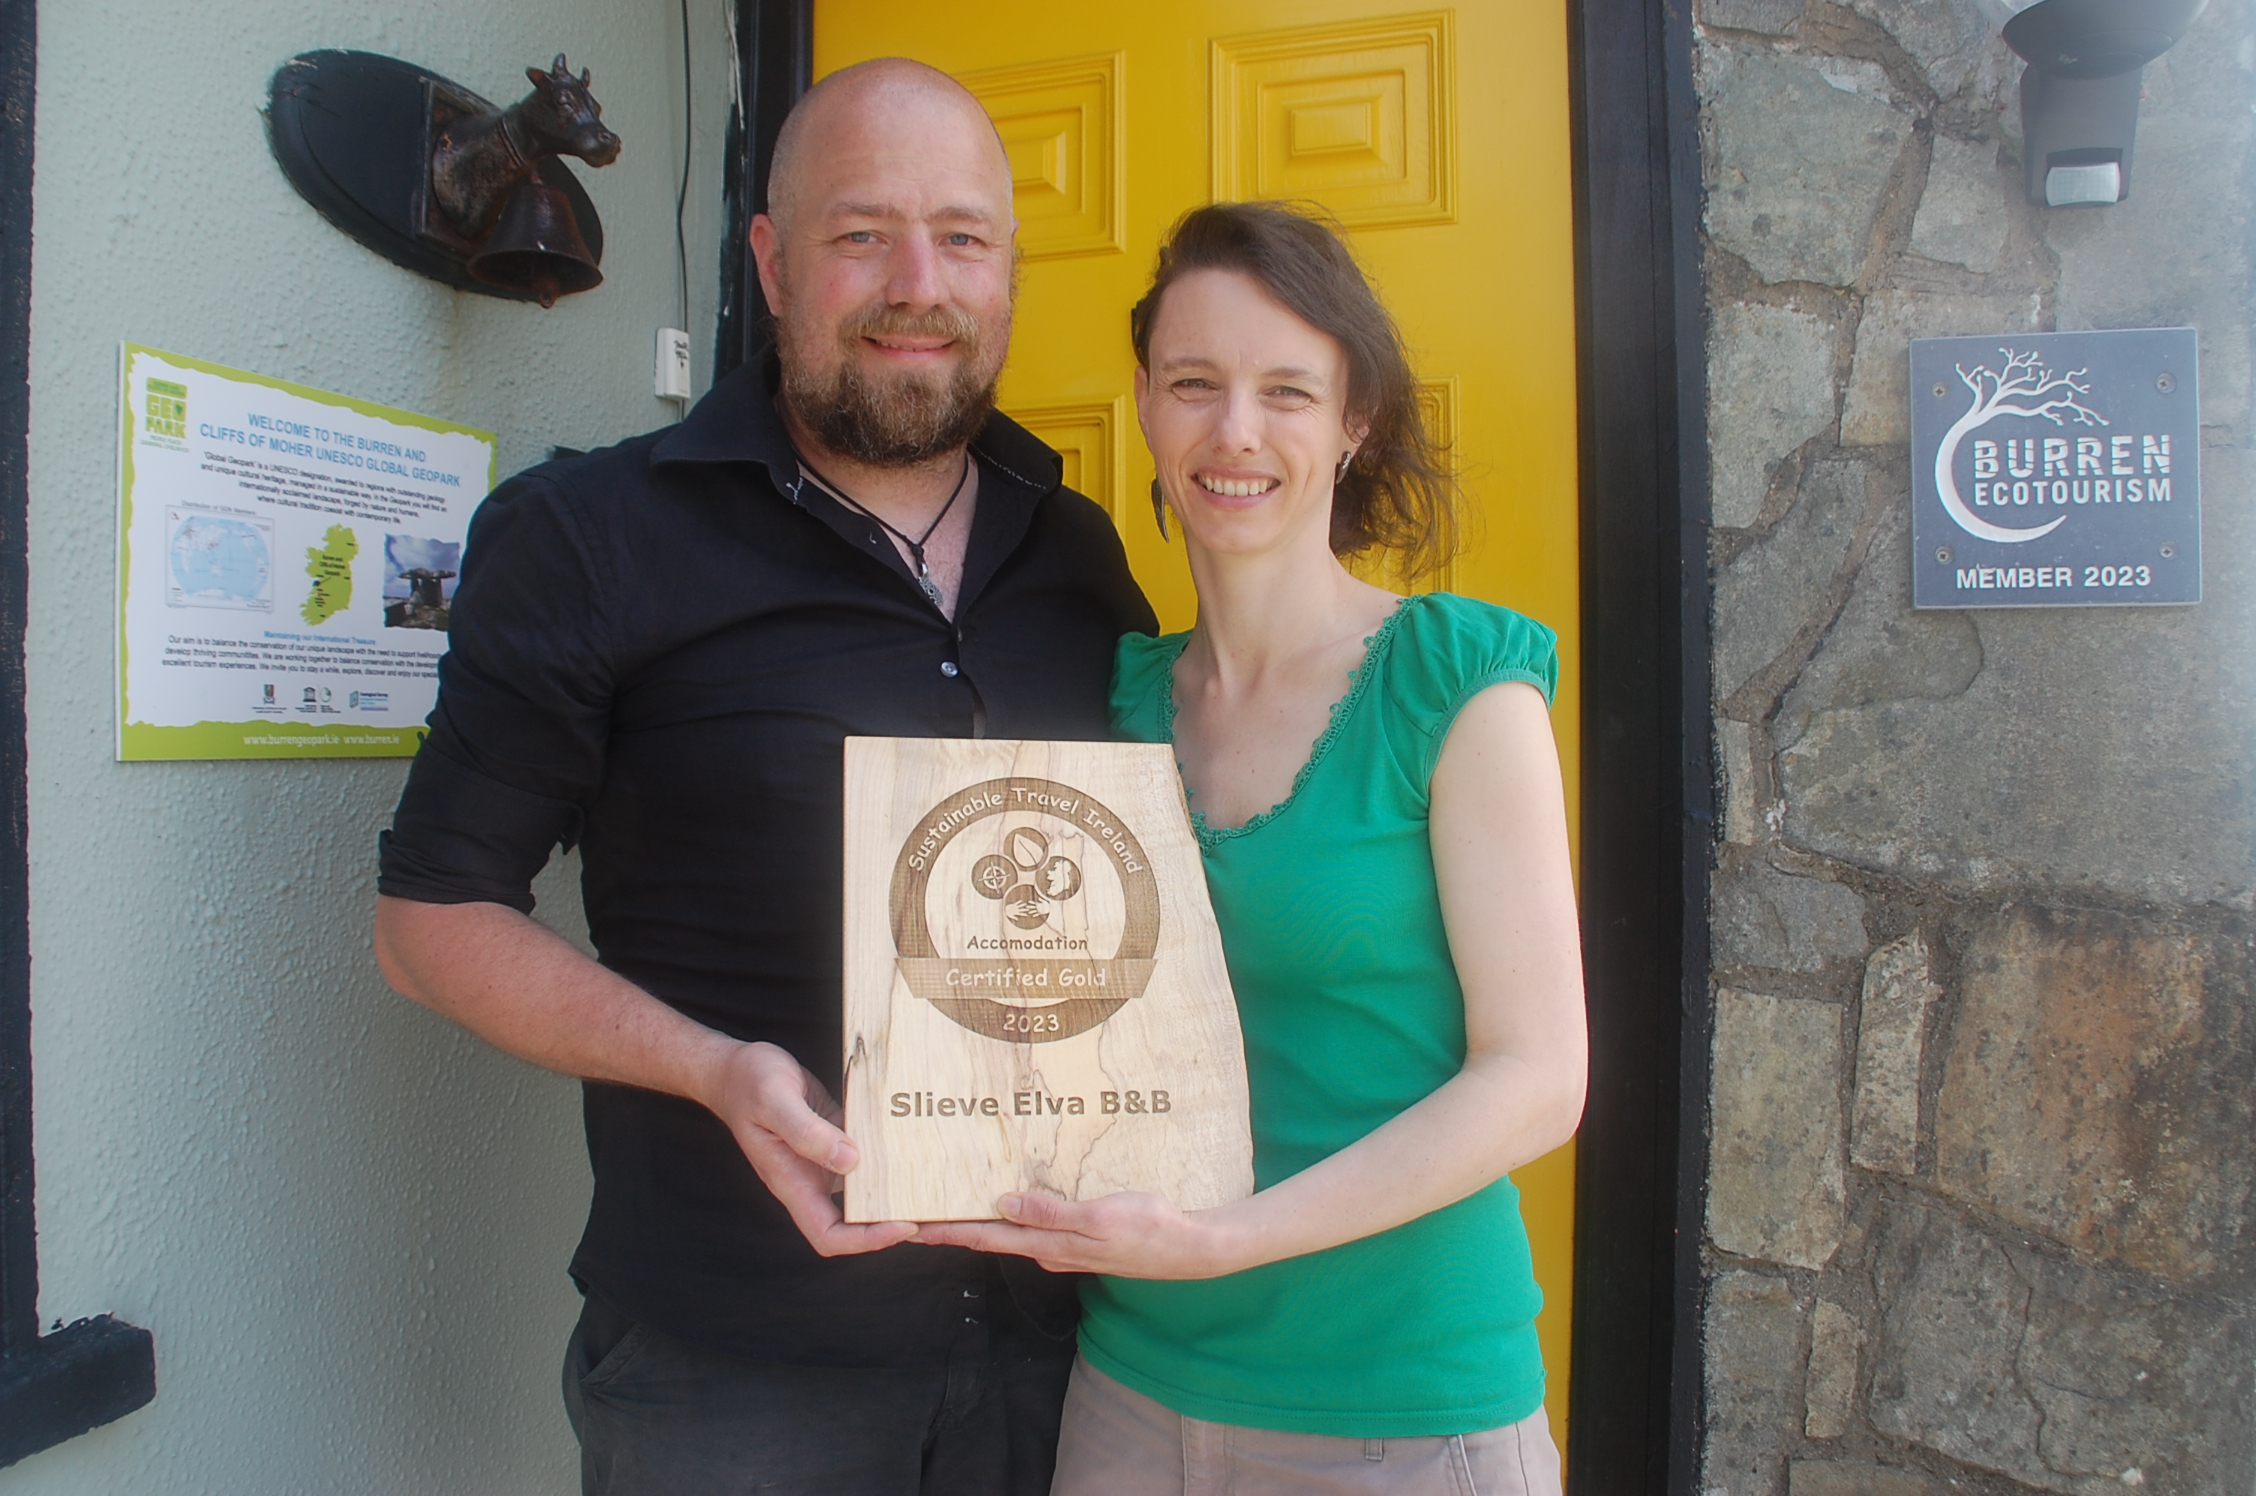 Slieve Elva owners holding their Sustainable Travel Ireland Gold Certification award 2023